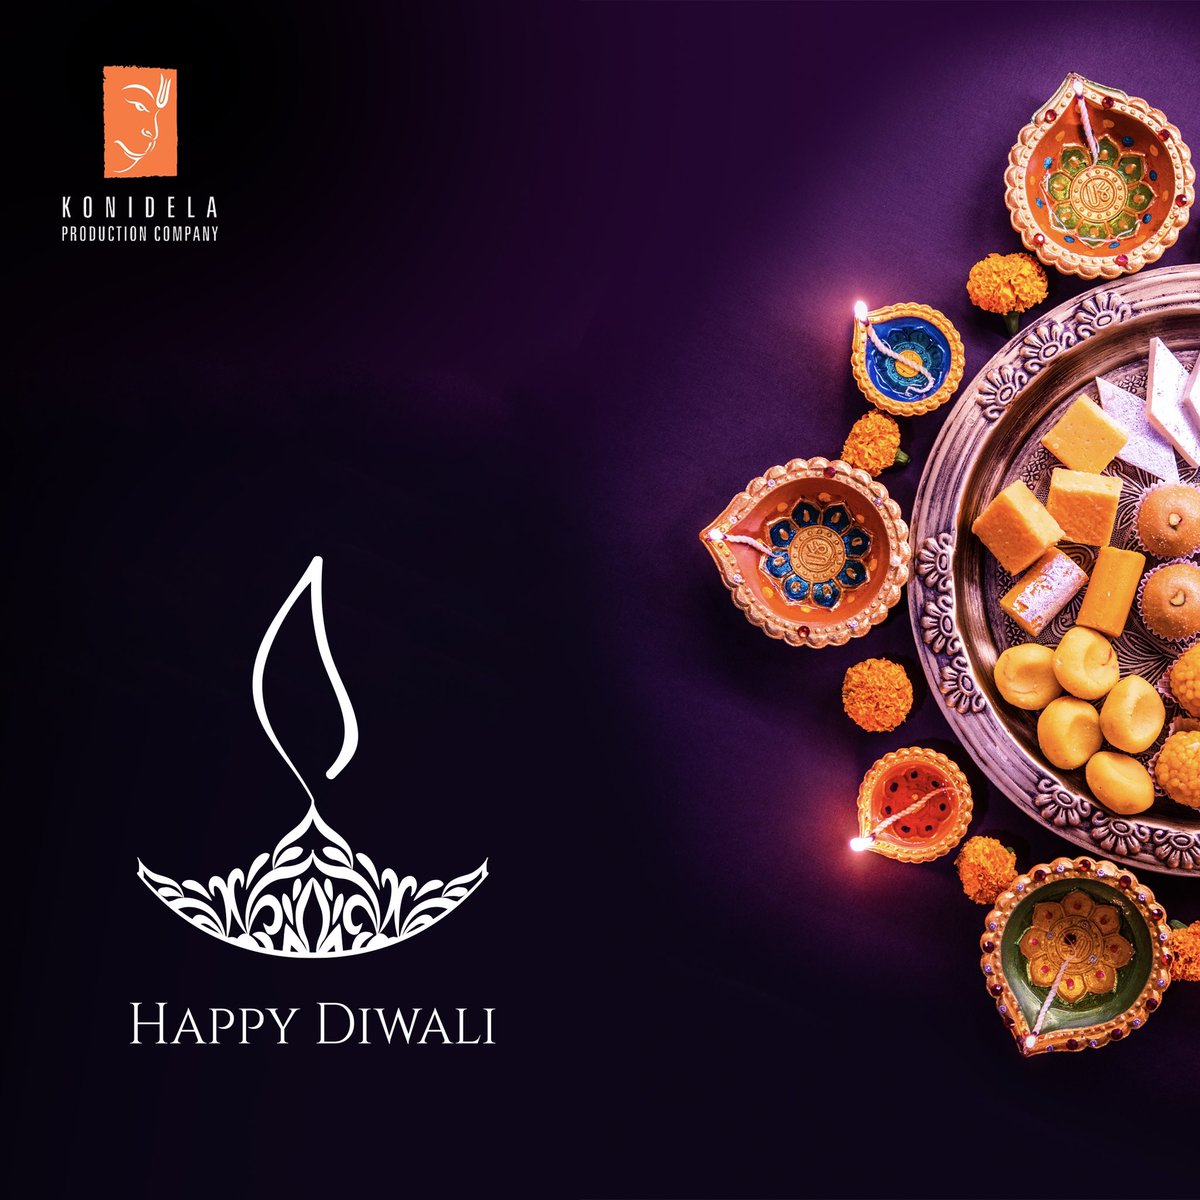 Team @KonidelaPro wishes you and your loved ones a safe and happy Diwali ! #HappyDiwali2022